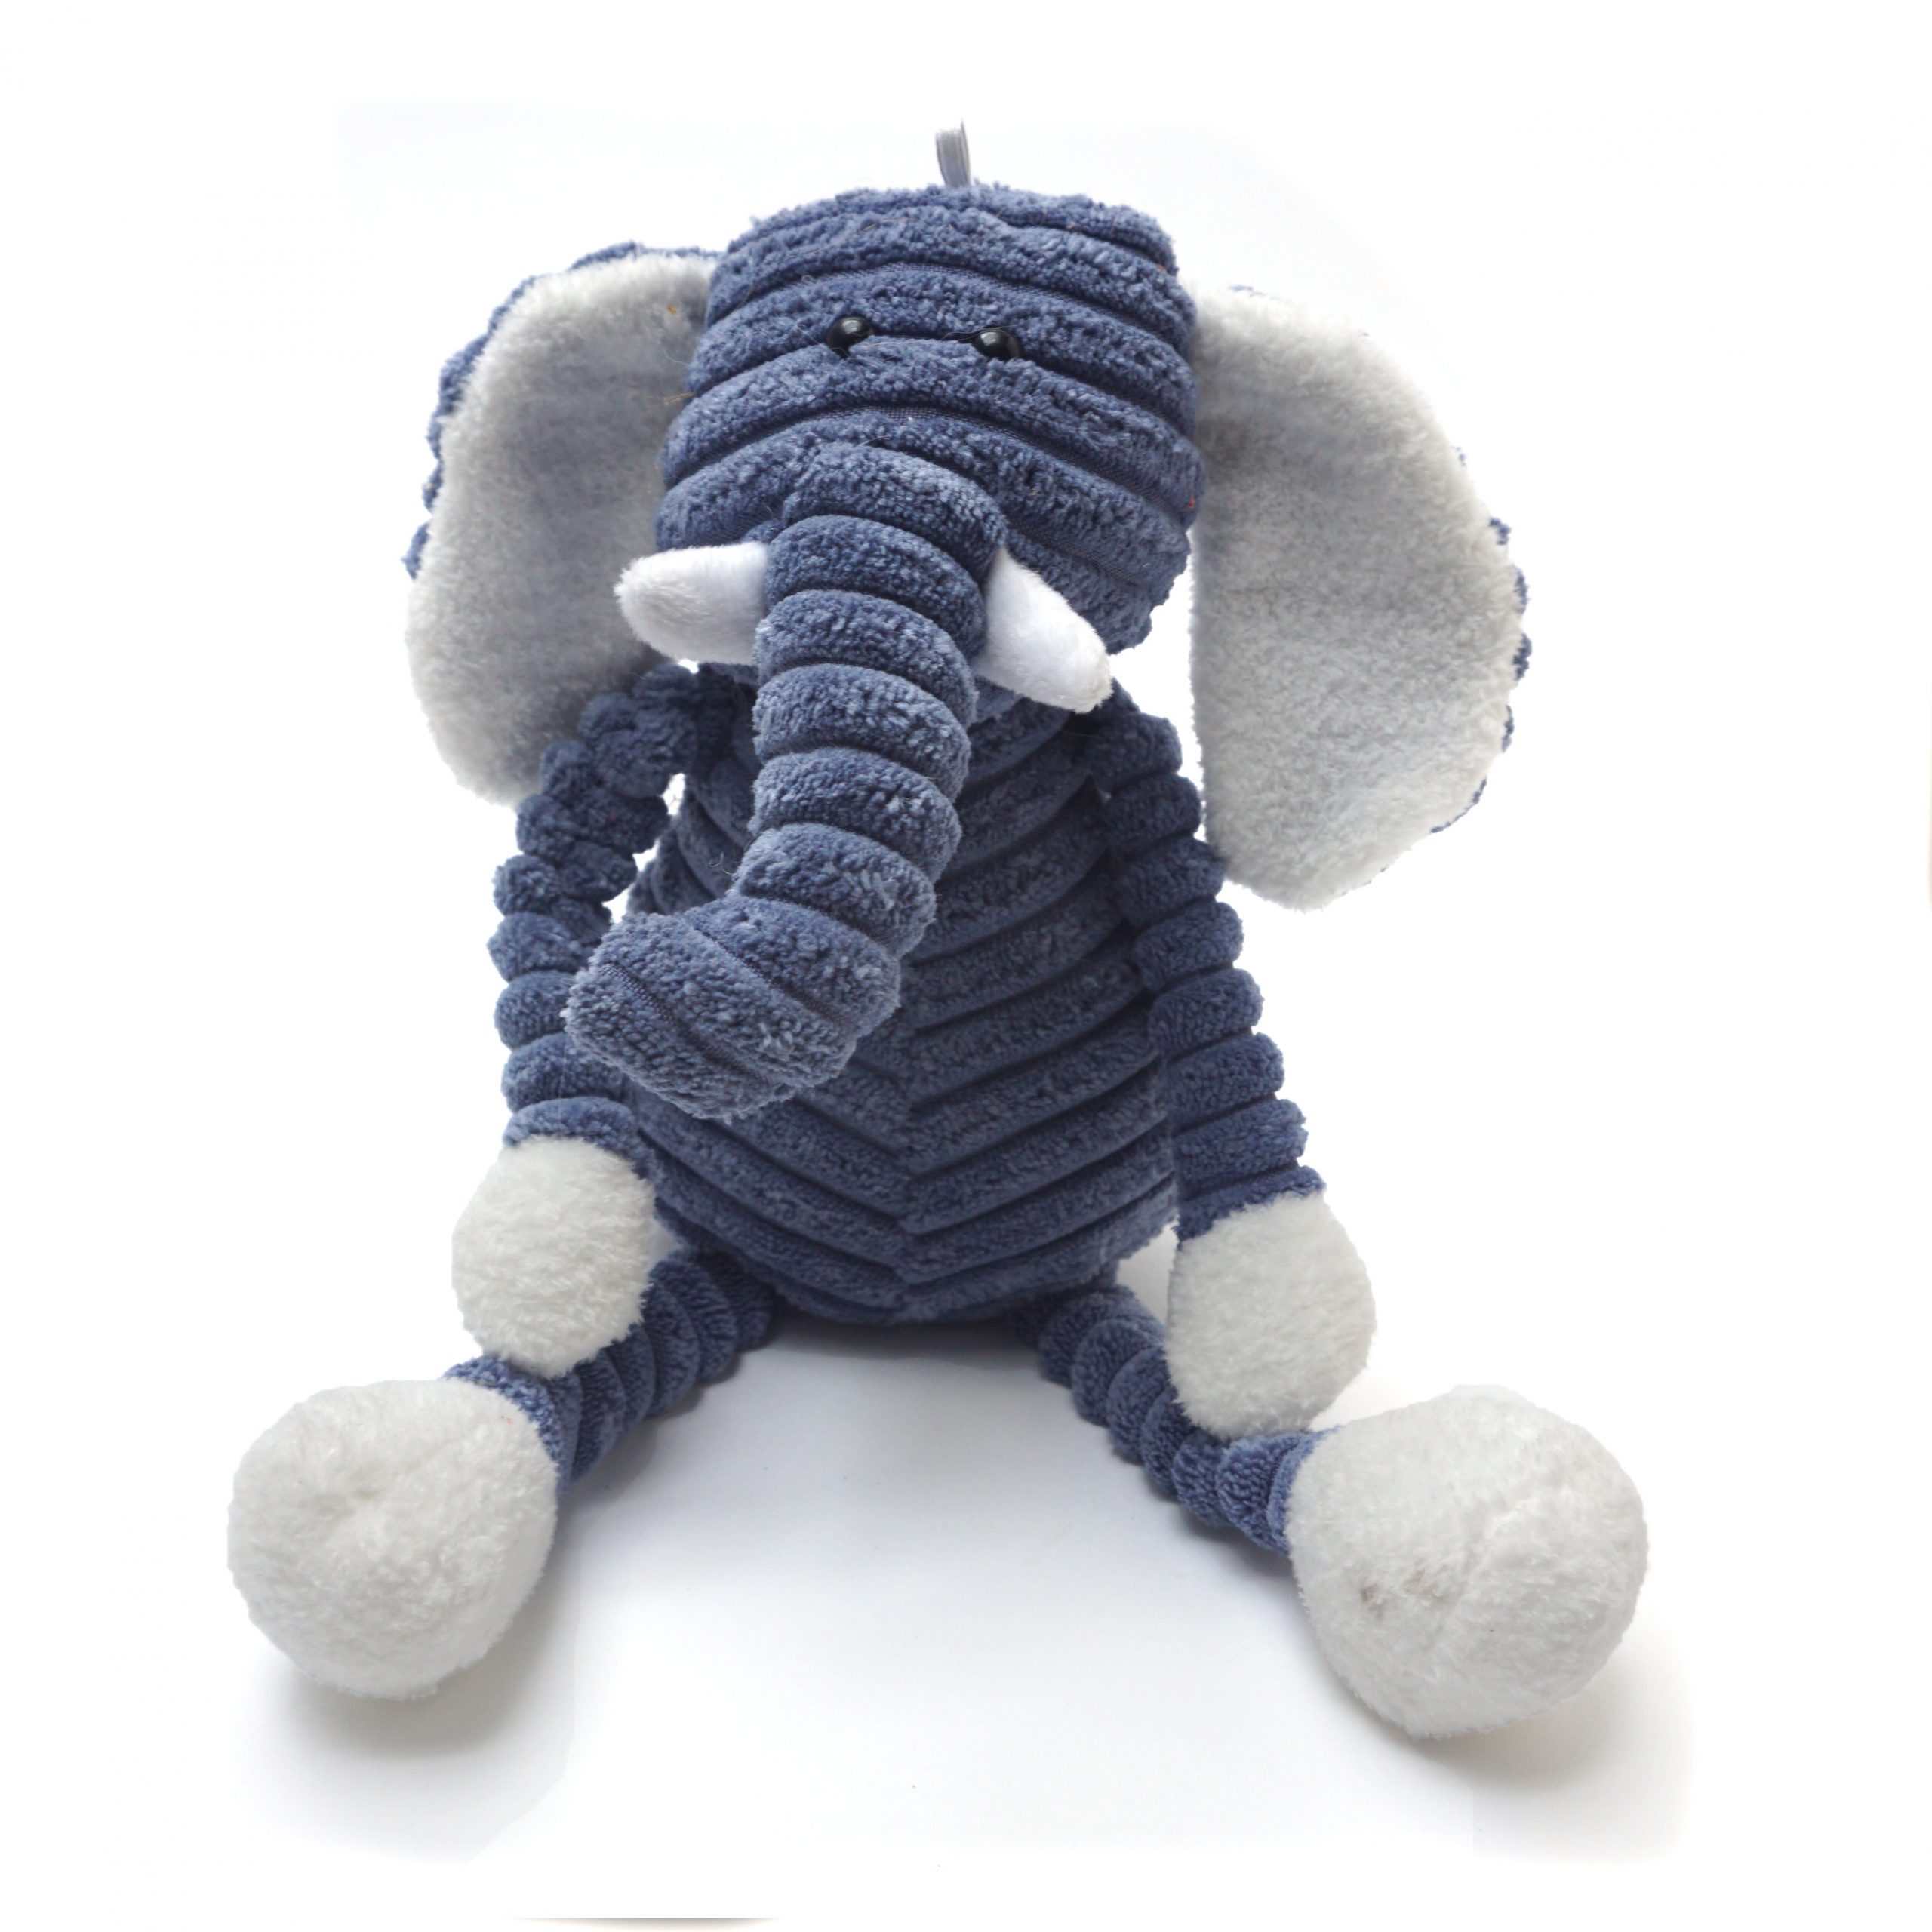 meester Paard privaat Knuffel olifant | Ollie - yanishop.nl Pluche olifant - baby knuffel -